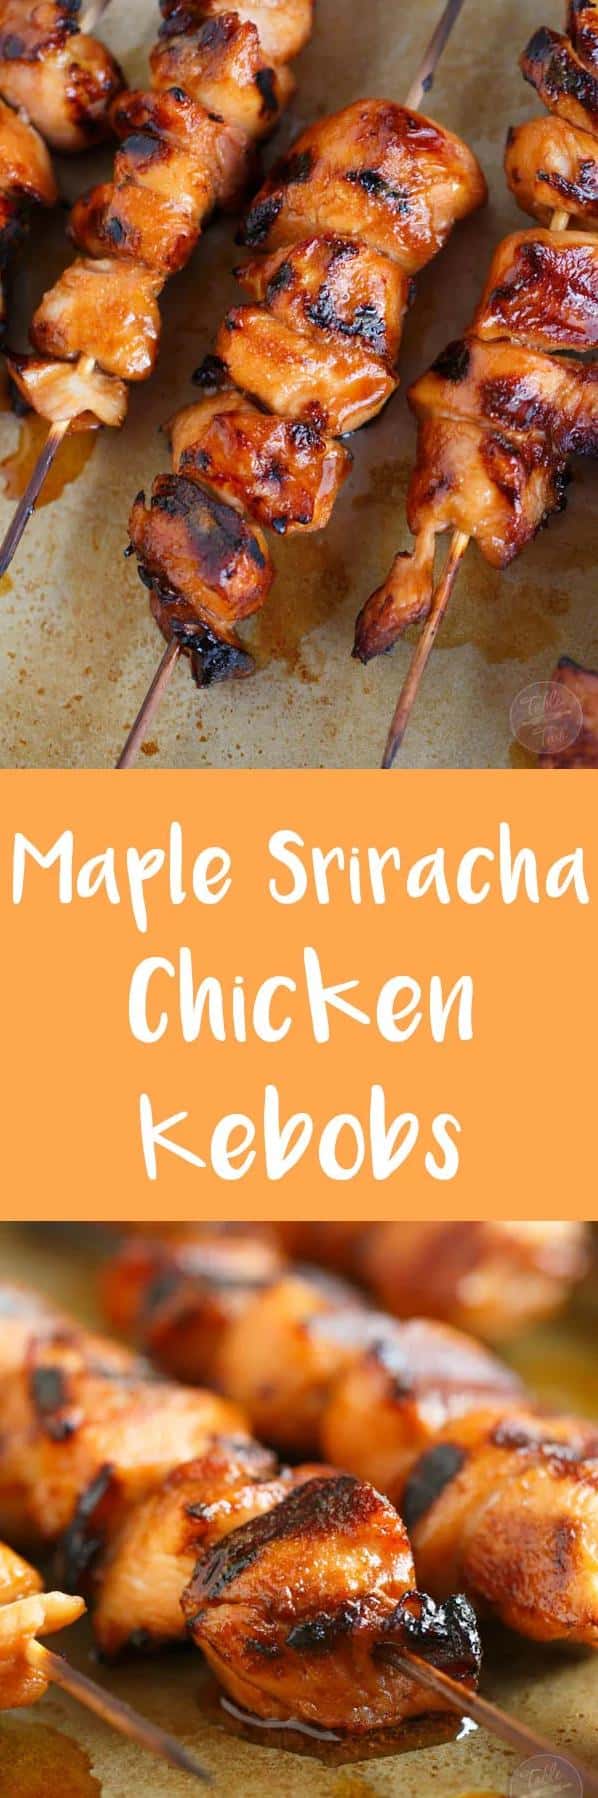  Impress your guests with these easy-to-make, delicious Maple Sriracha Chicken Kabobs